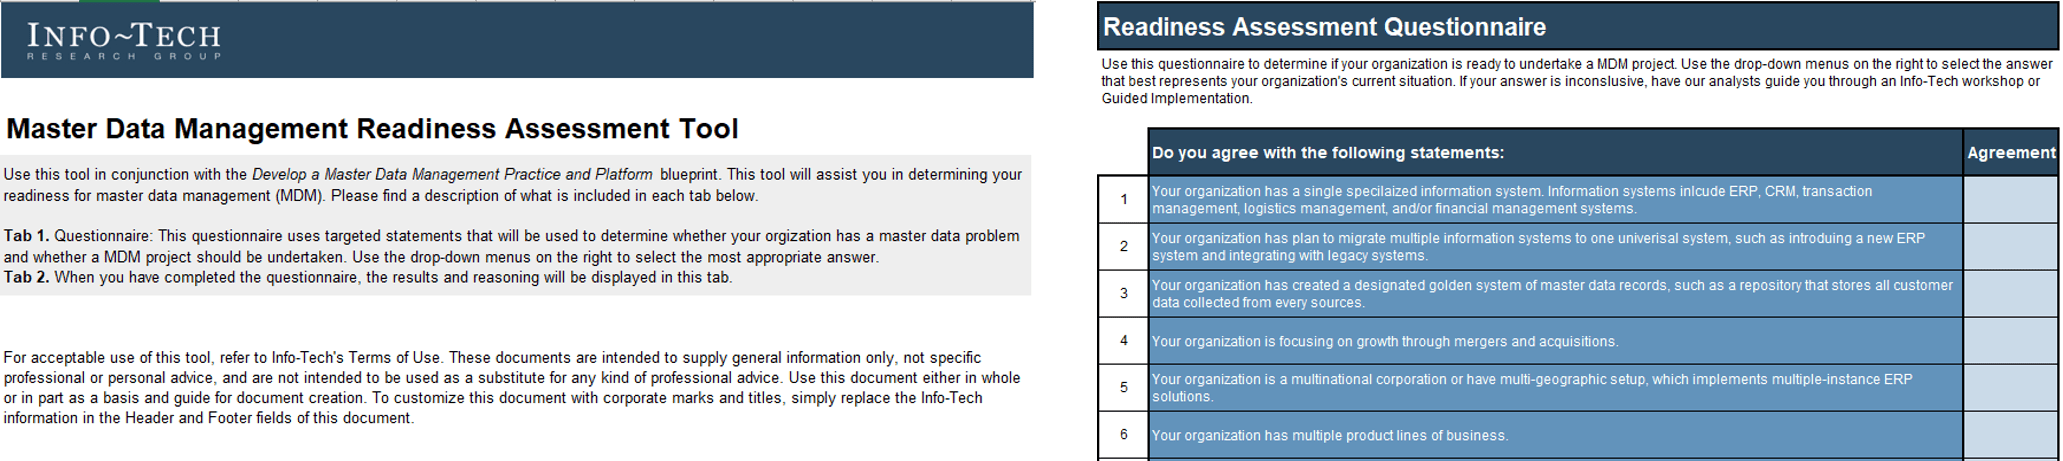 The image contains screenshots of the MDM Readiness Assessment Tool.